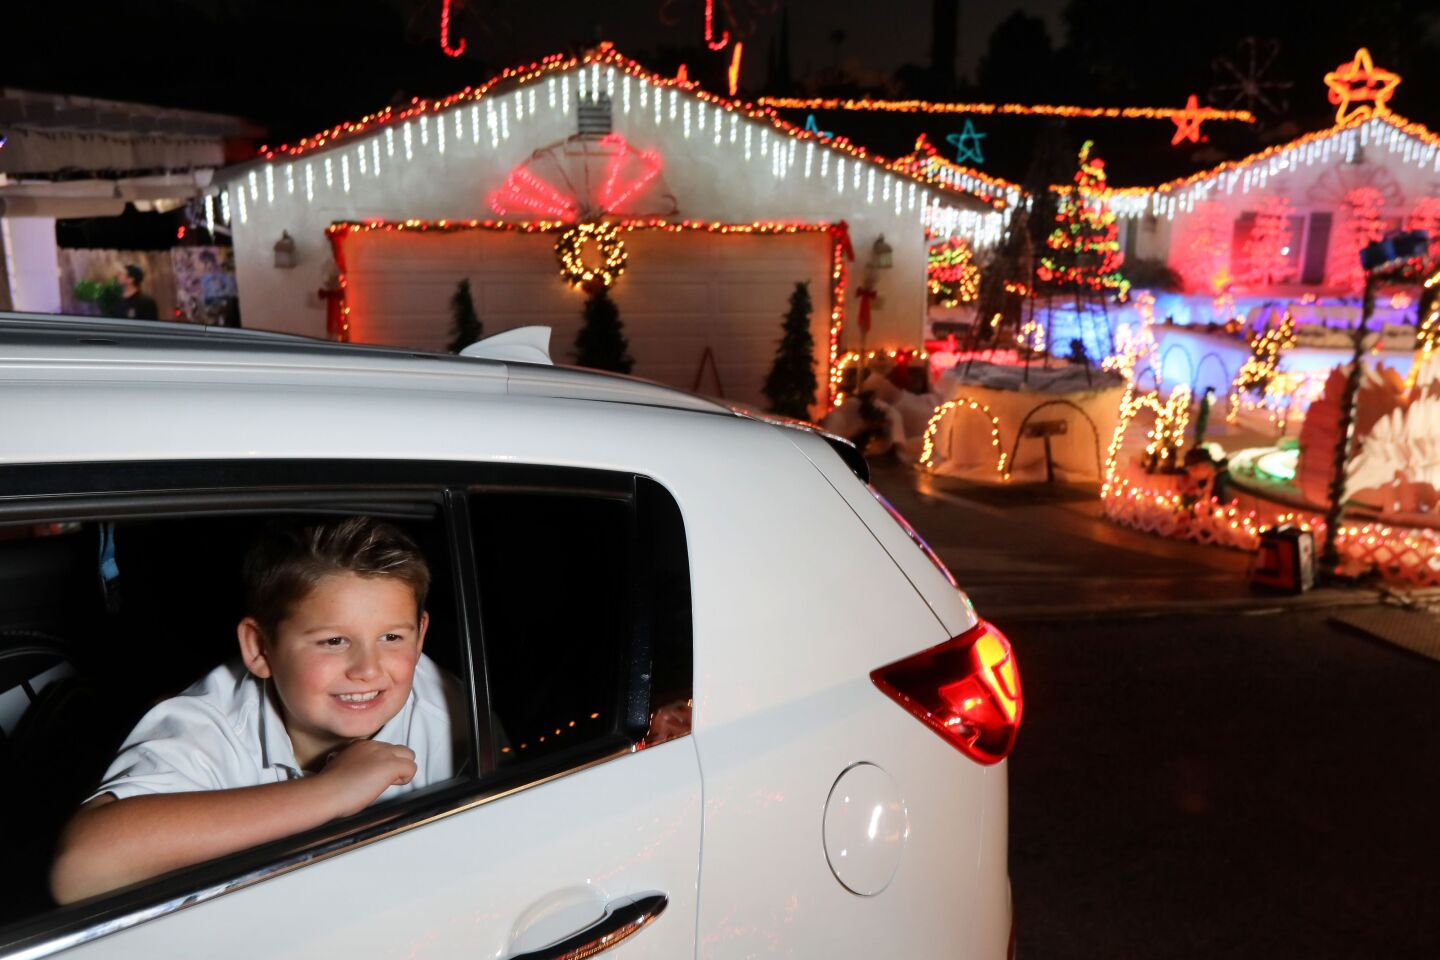 Eight-year-old Logan Taylor enjoys the extensive Christmas decorations on both side of the circular driveway of the home of Mack Schreiber on Reche Road in Fallbrook. A steady stream of vehicles pass through.